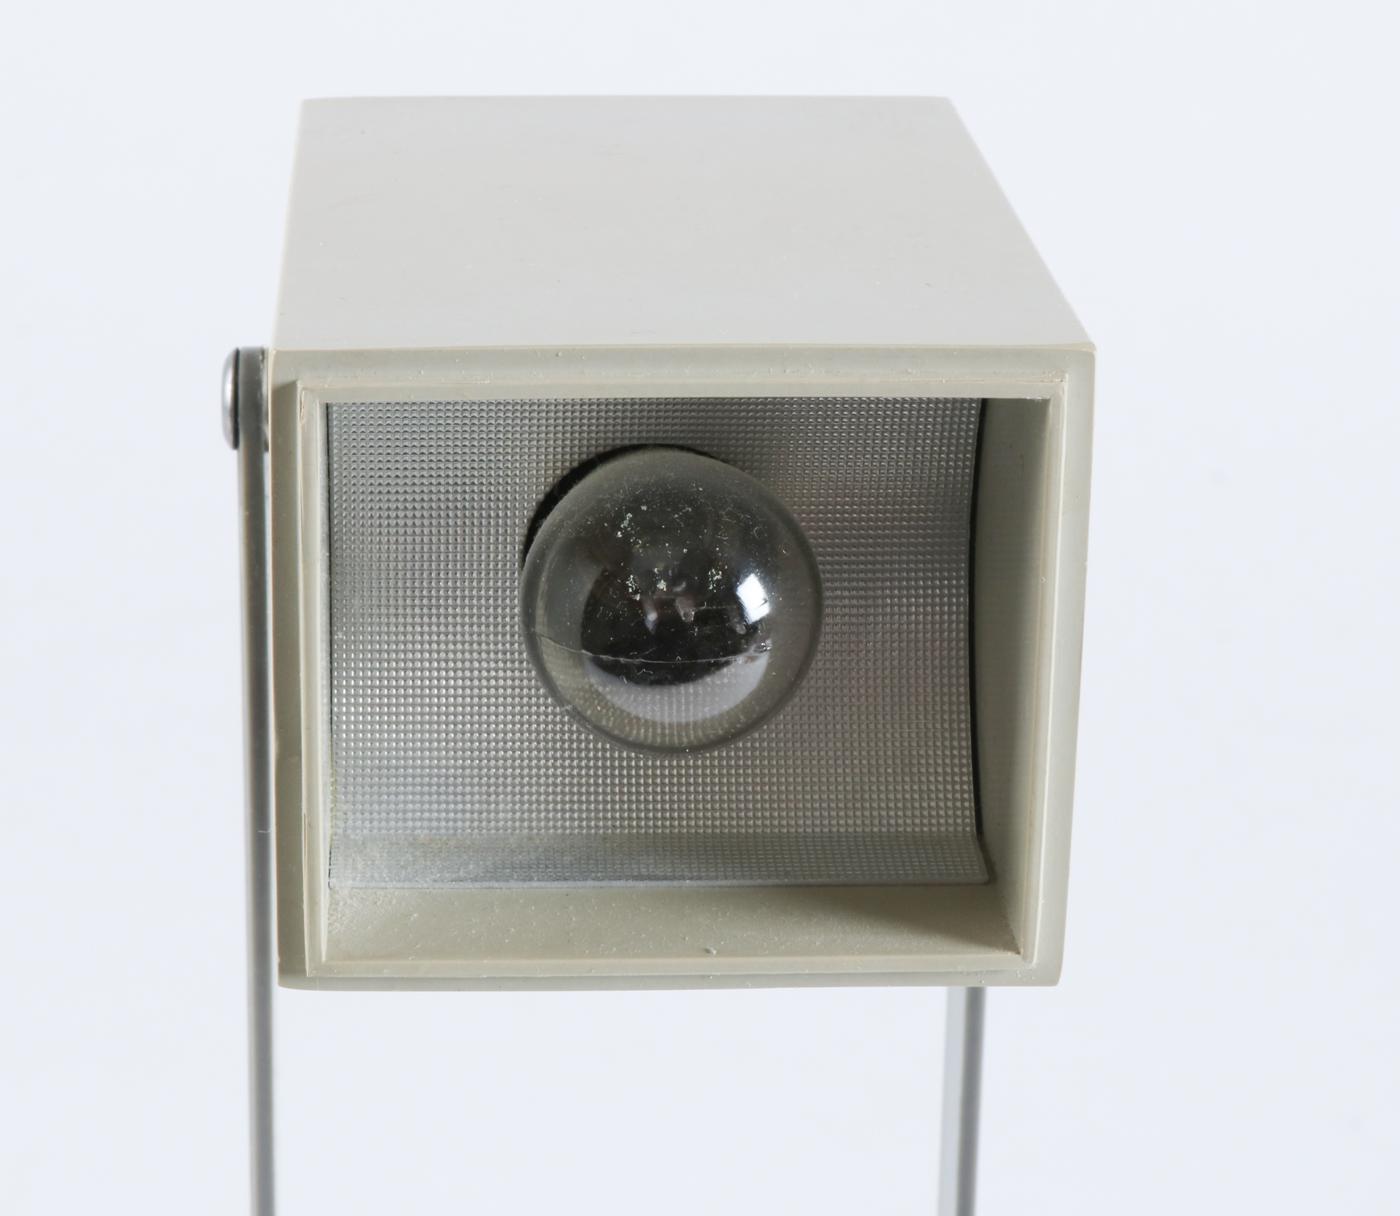 Rare Lampetit lamp designed by Verner Panton for Louis Poulsen in 1966. A small compact lamp with rectangular shapes that was ahead of its time. This lamp is often attributed to the Louis Poulsen design team, however, after the death of Verner